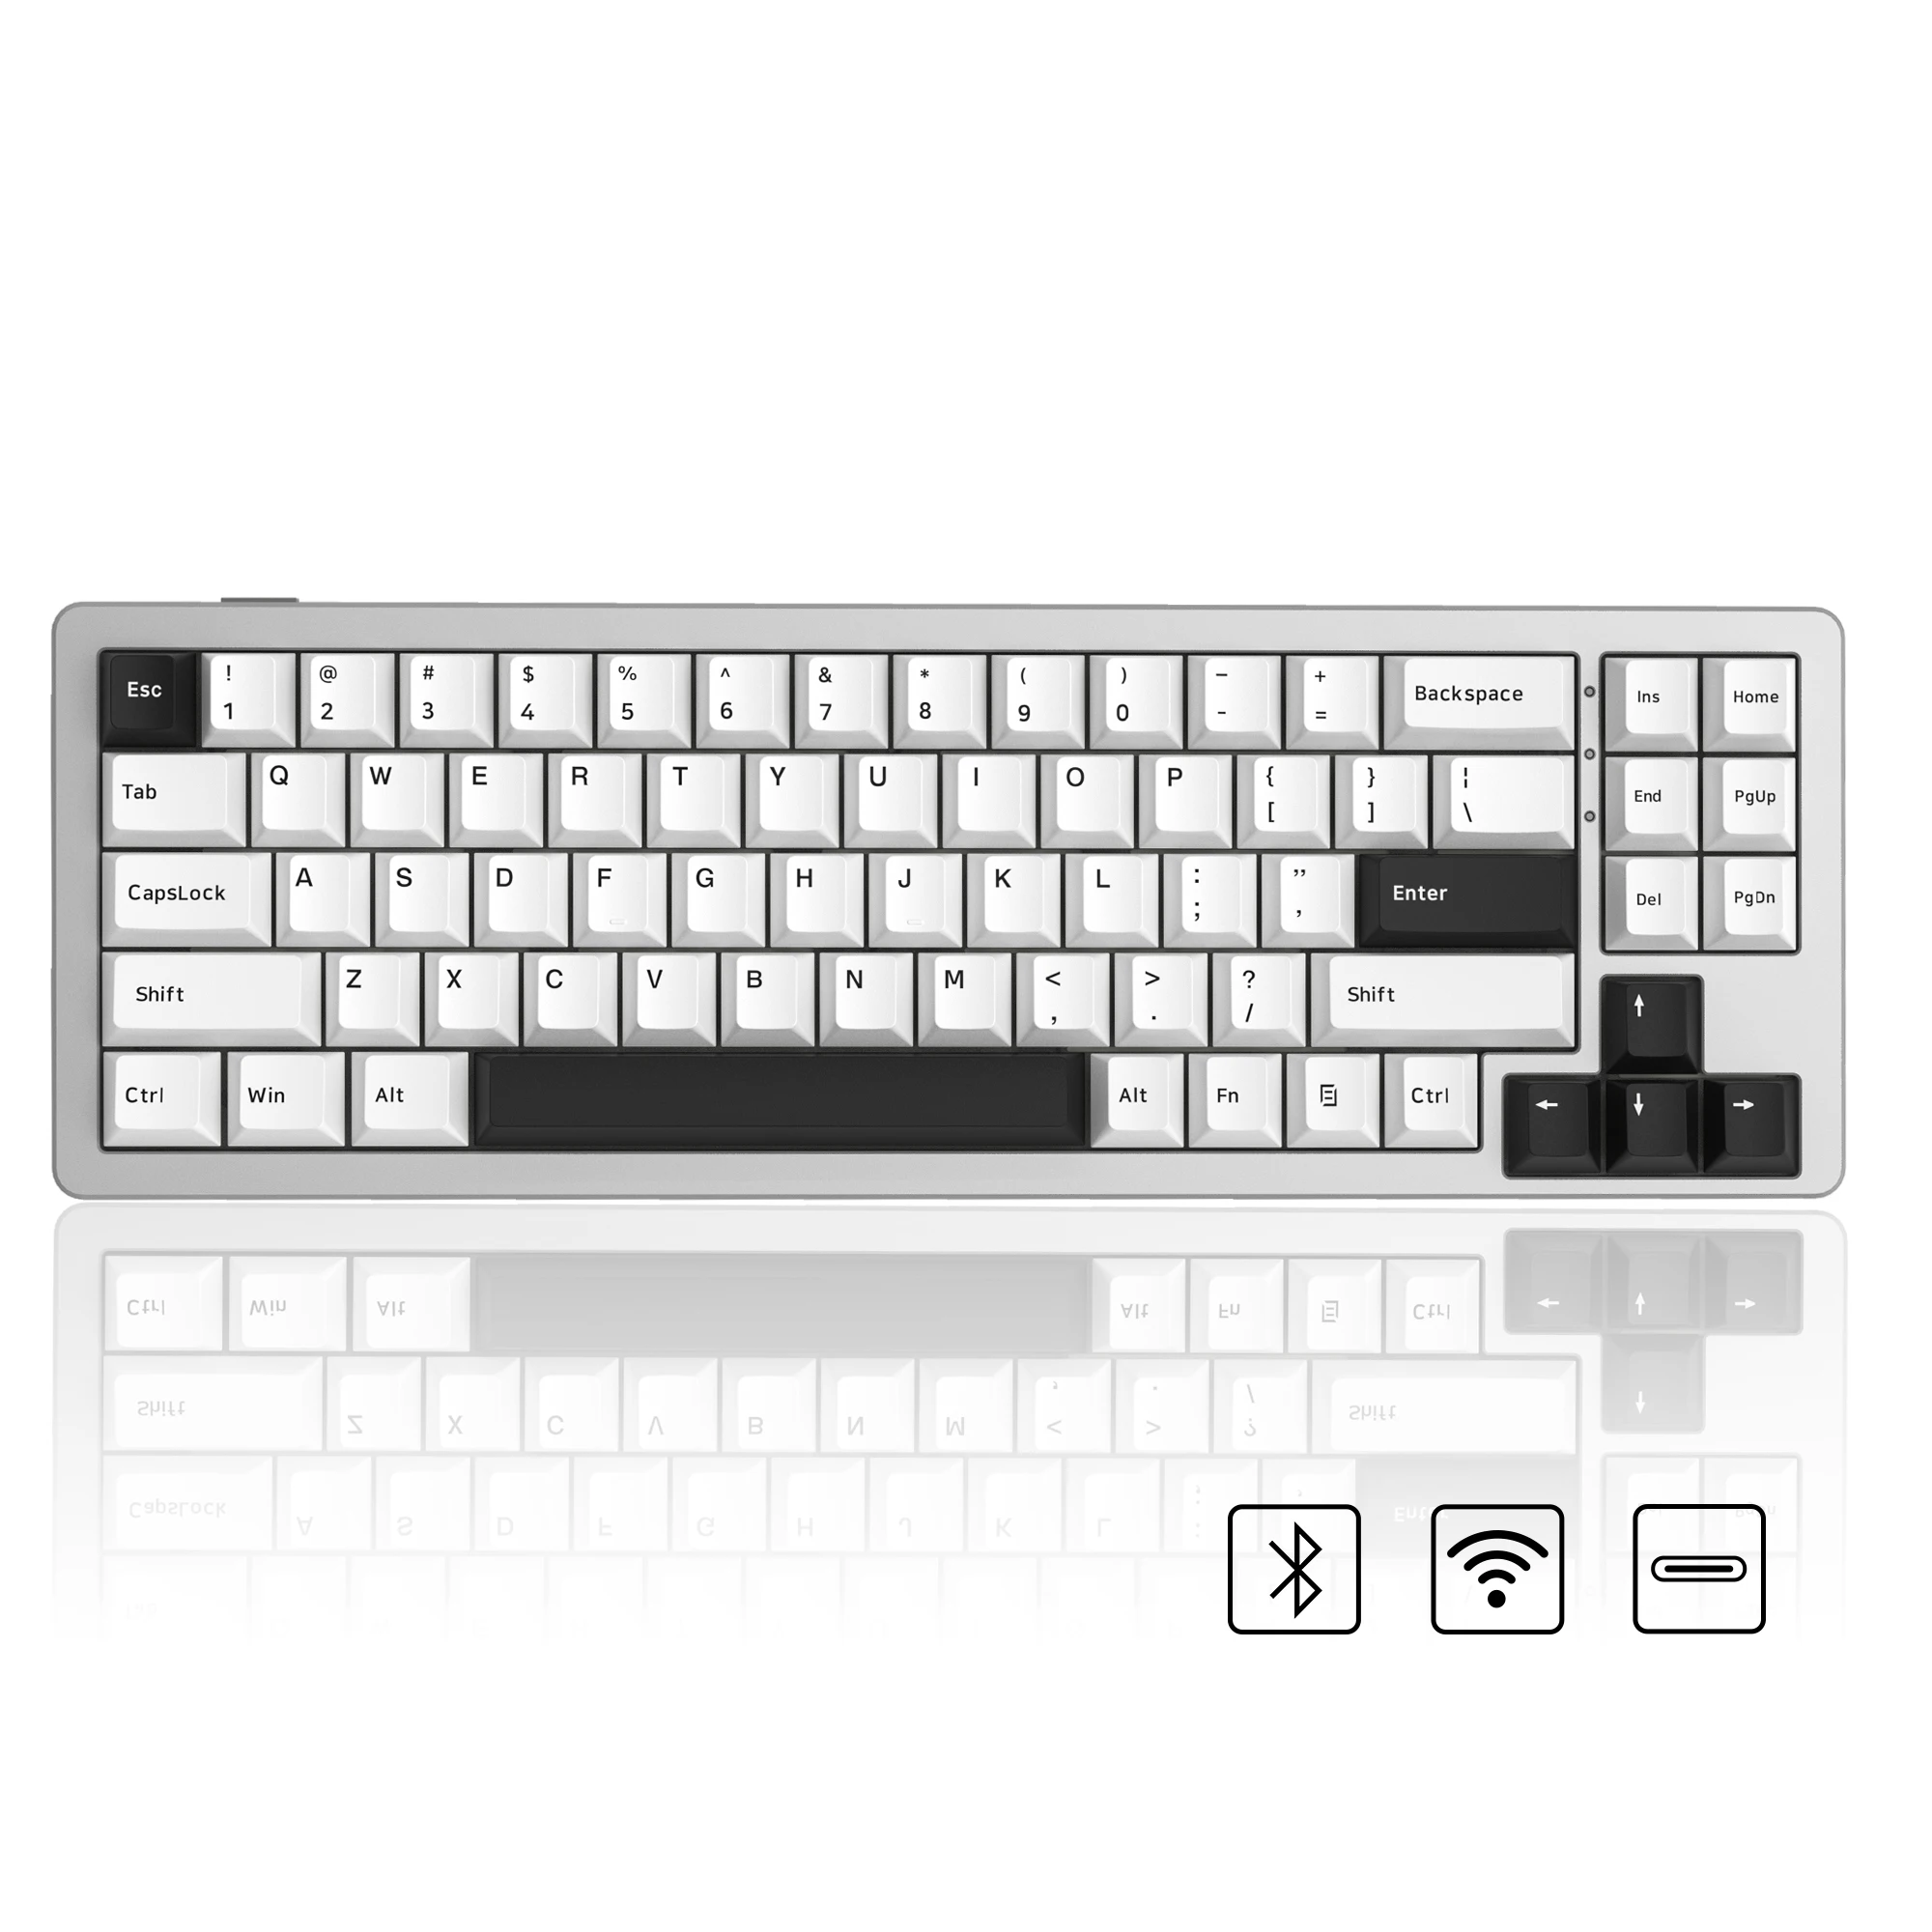 

Womier BOW White S-K71 Bluetooth Wireless Gaming Mechanical Keyboard Hot Swap 68% Aluminum Tri-Mode Gasket for Mac Wp Red Switch